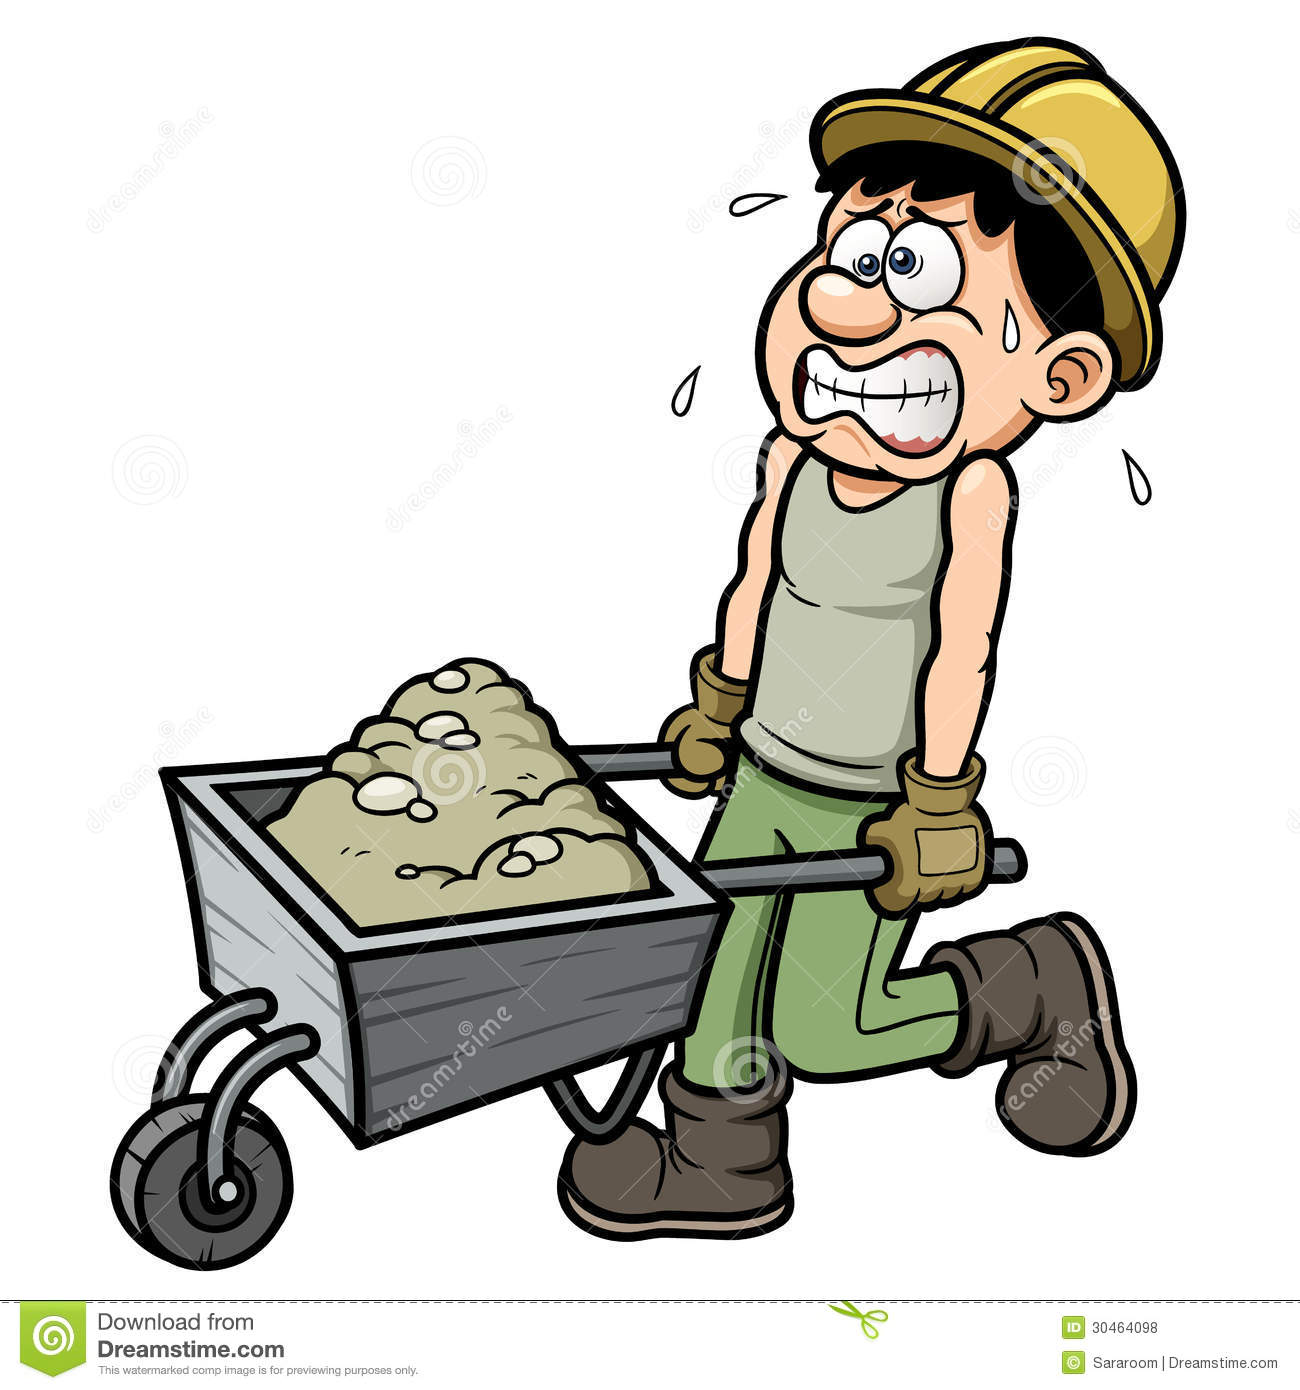 Construction Worker Cartoon Clipart Free | Free download on ClipArtMag